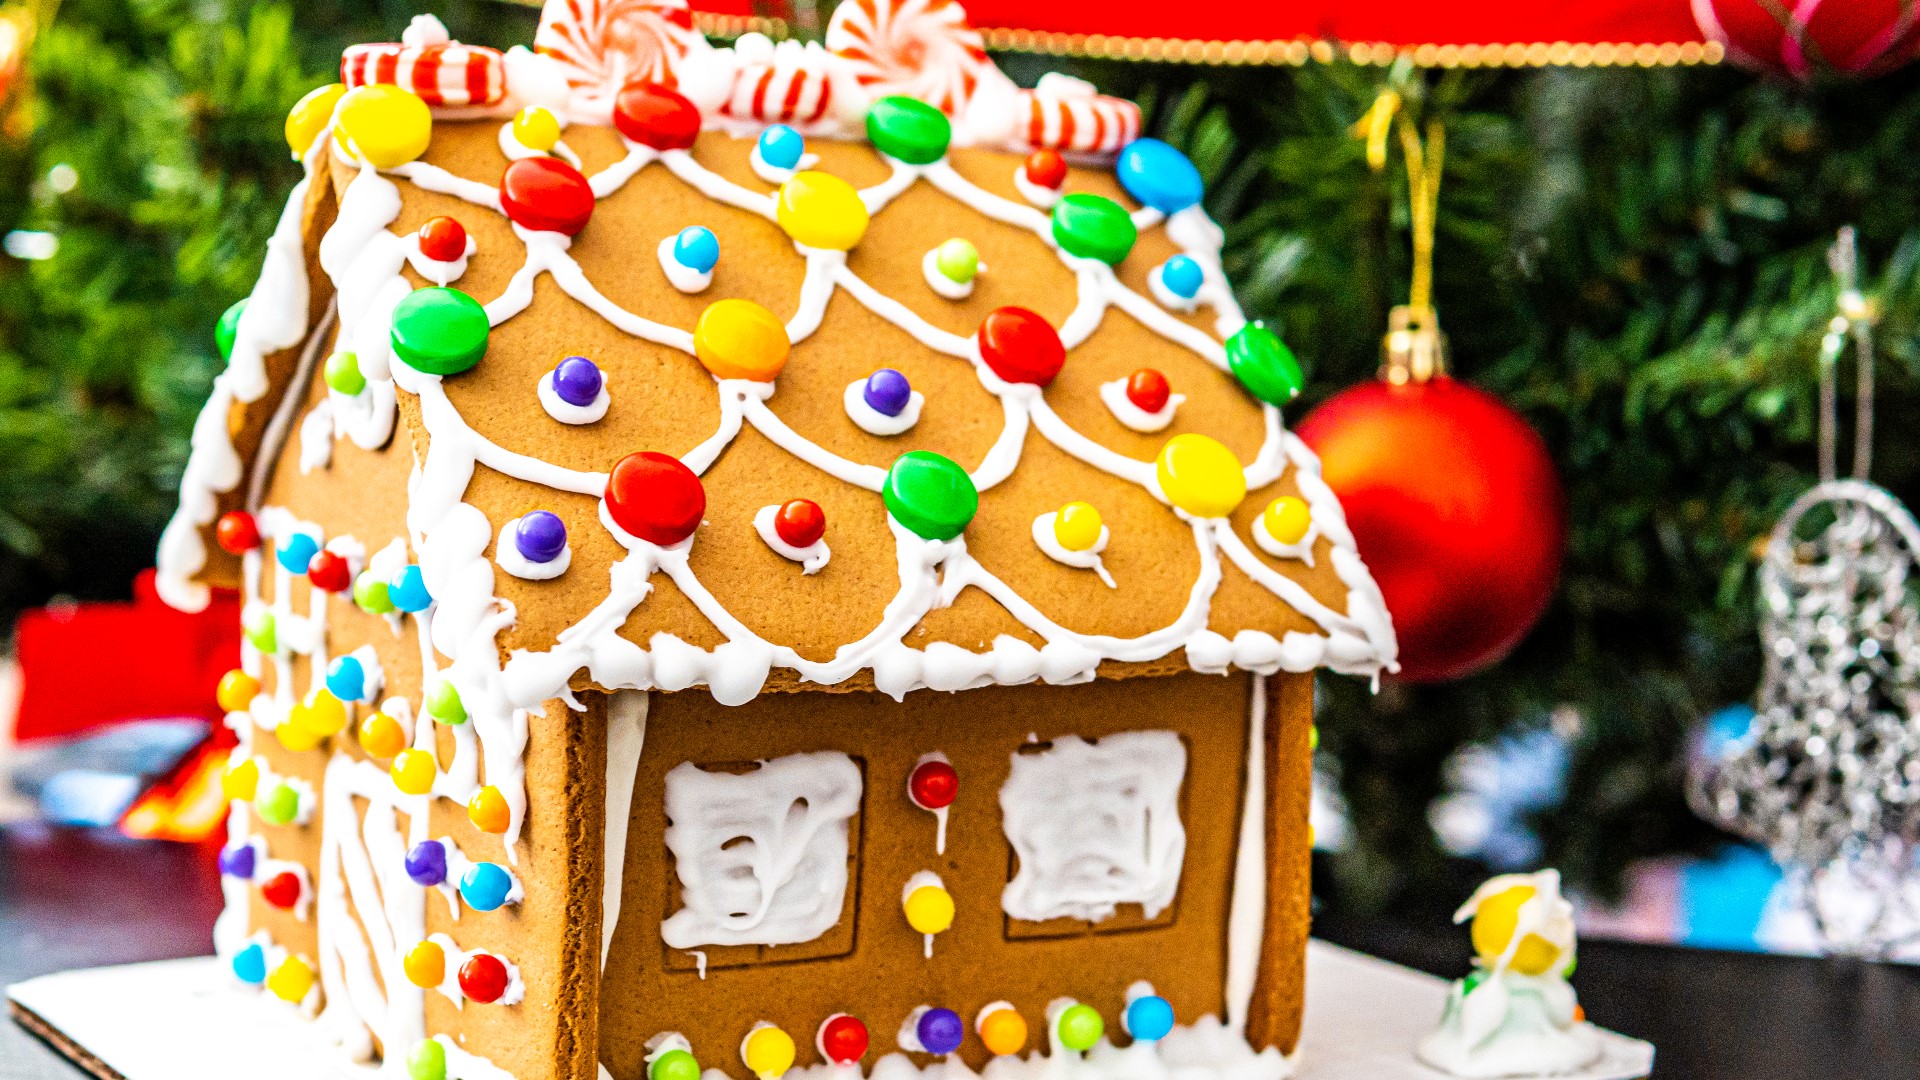 Gingerbread houses originated in Germany during the 16th century, according to PBS.